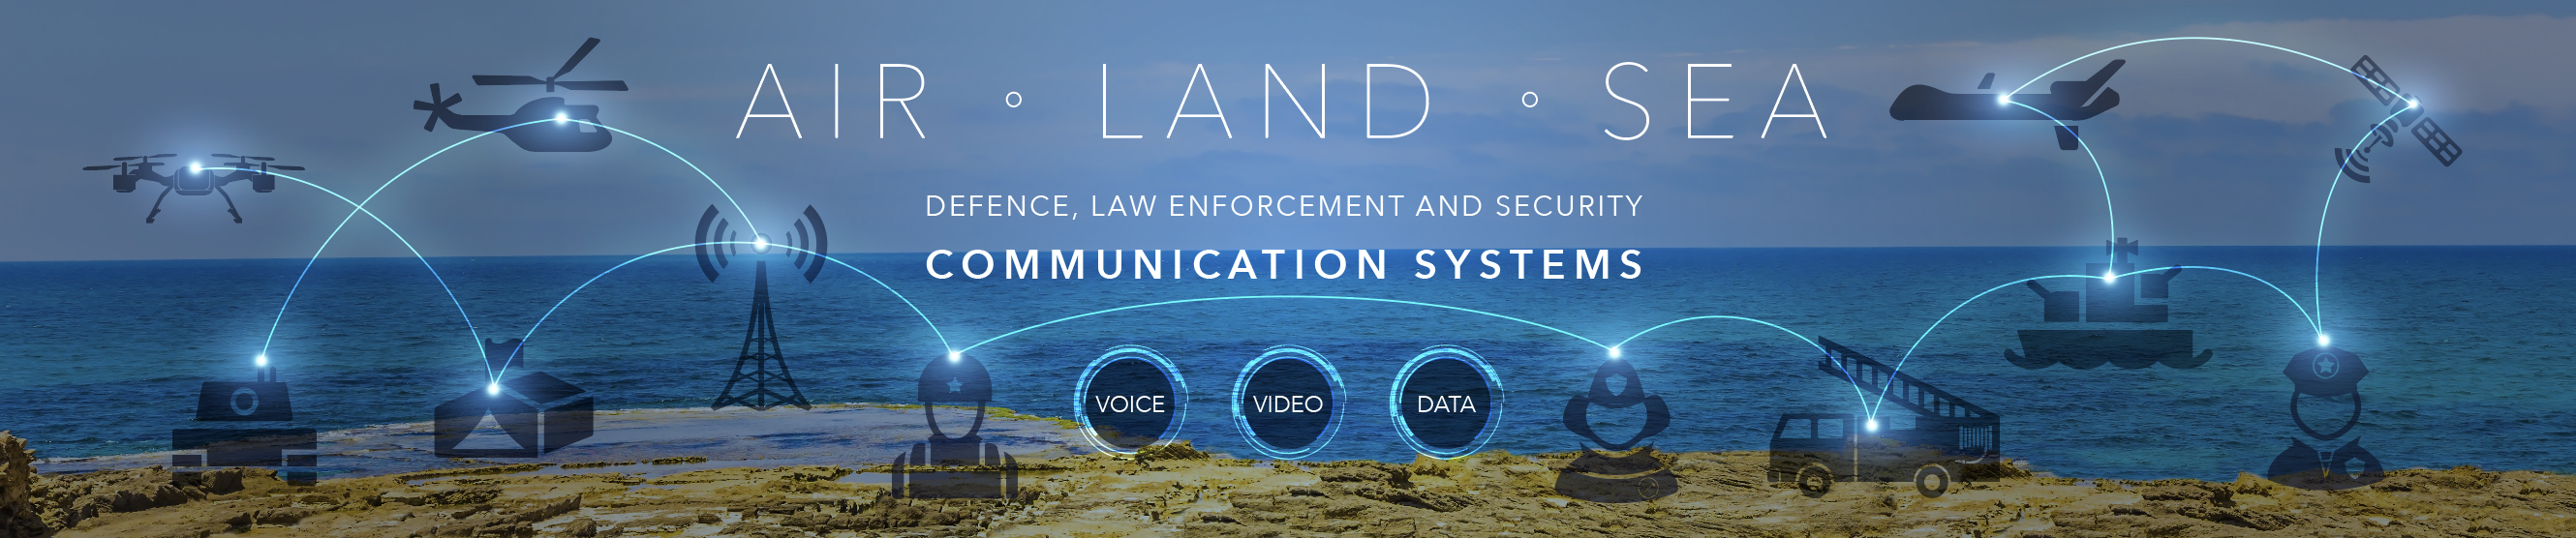 Defence, Law Enforcement, Security products for land, sea and air